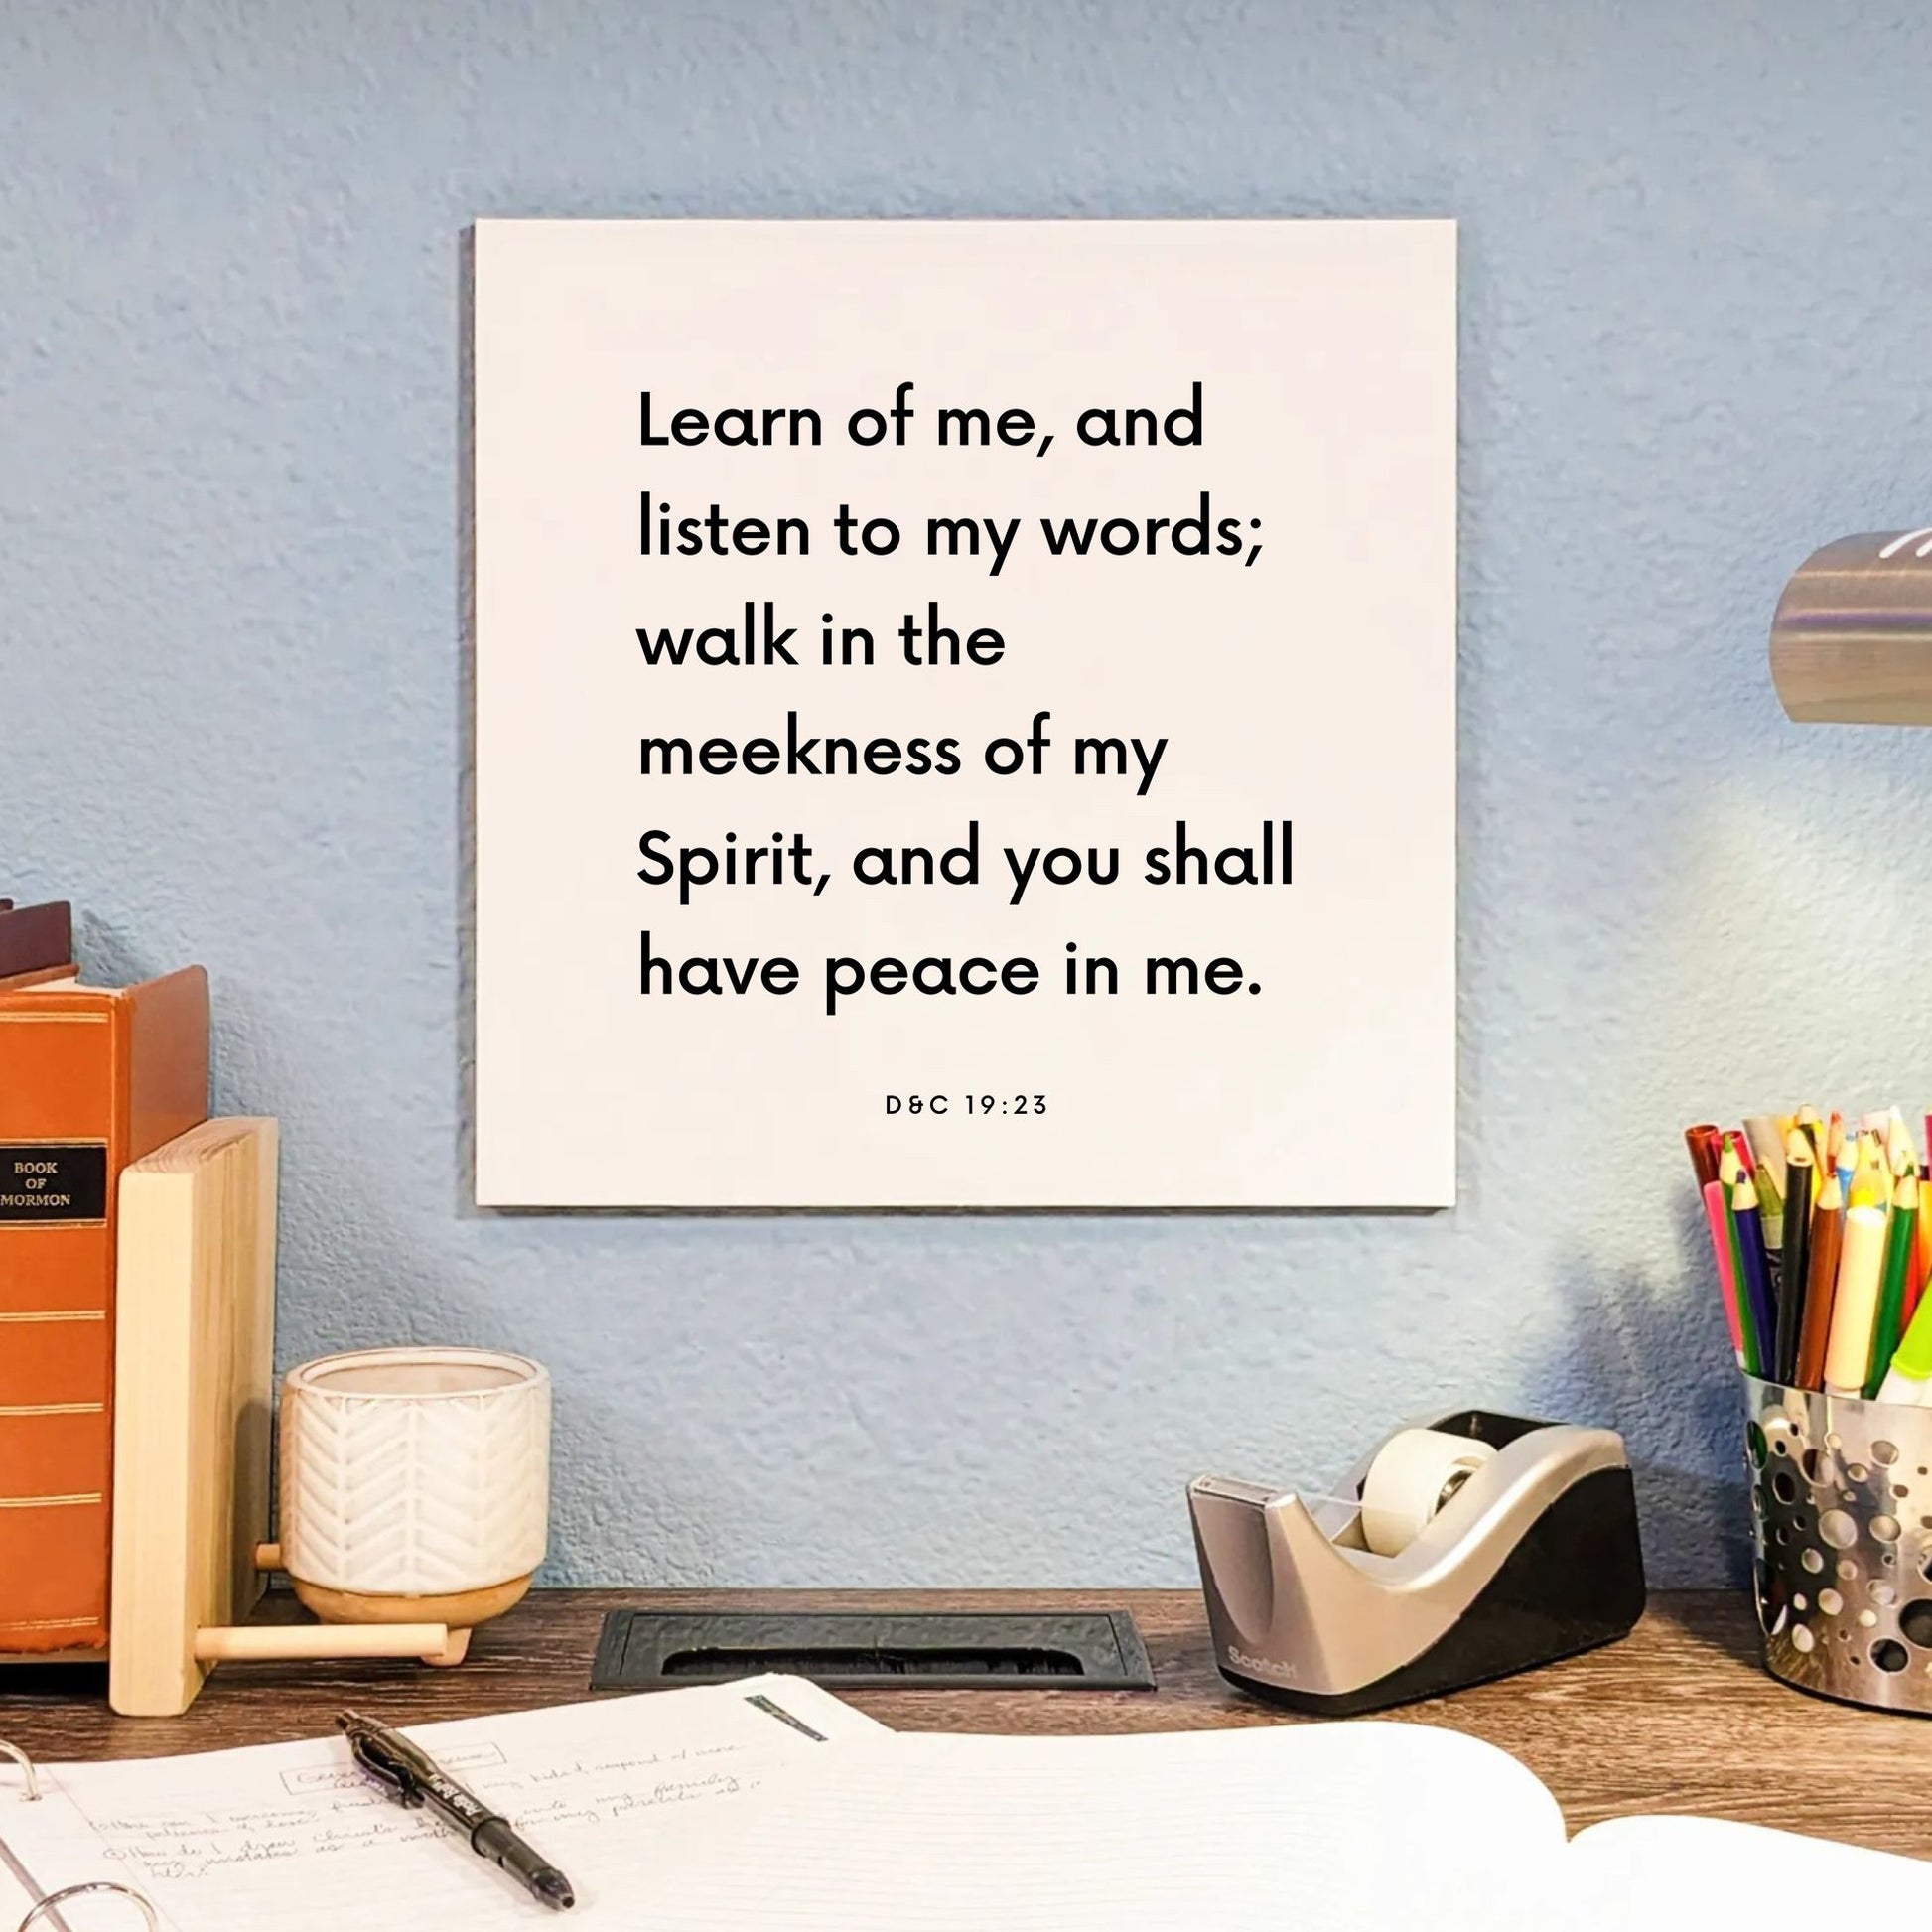 Desk mouting of the scripture tile for D&C 19:23 - "Learn of me, and listen to my words"